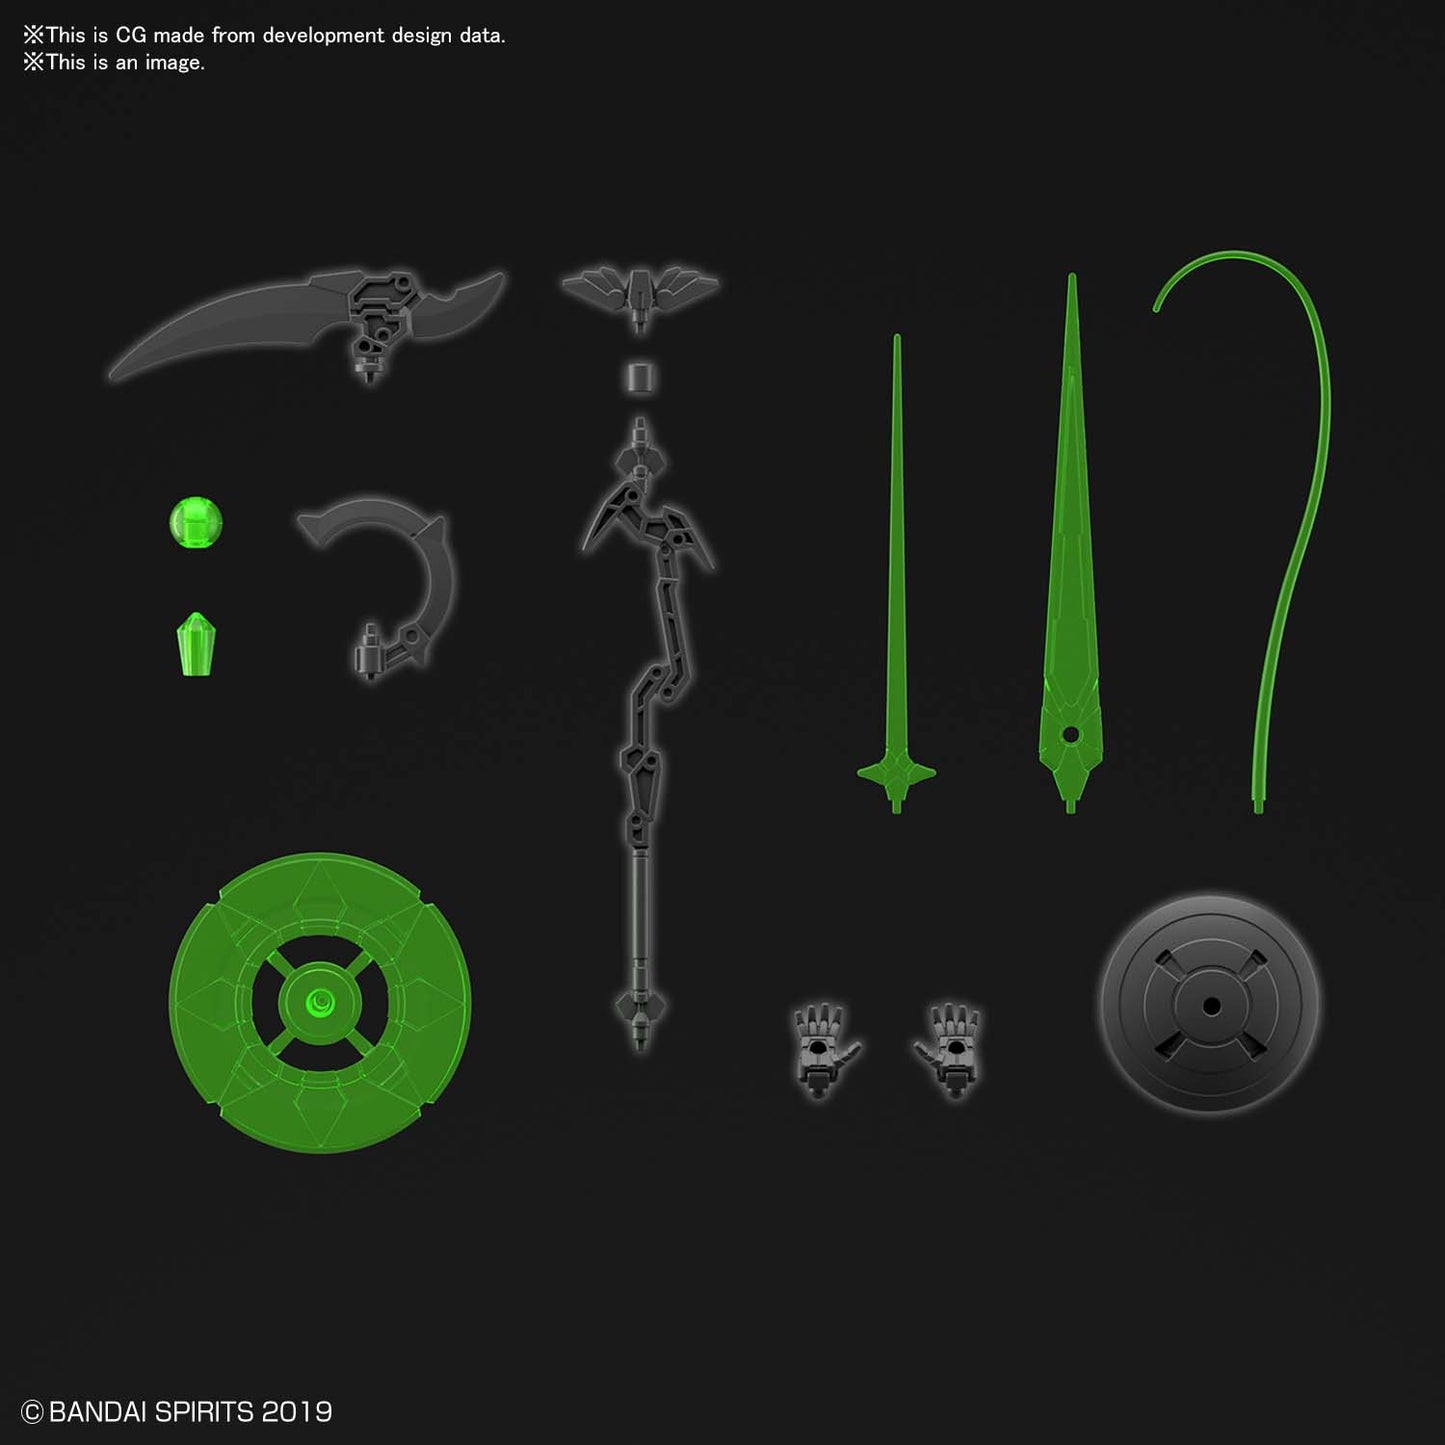 CUSTOMIZE WEAPONS (WITCHCRAFT WEAPON)